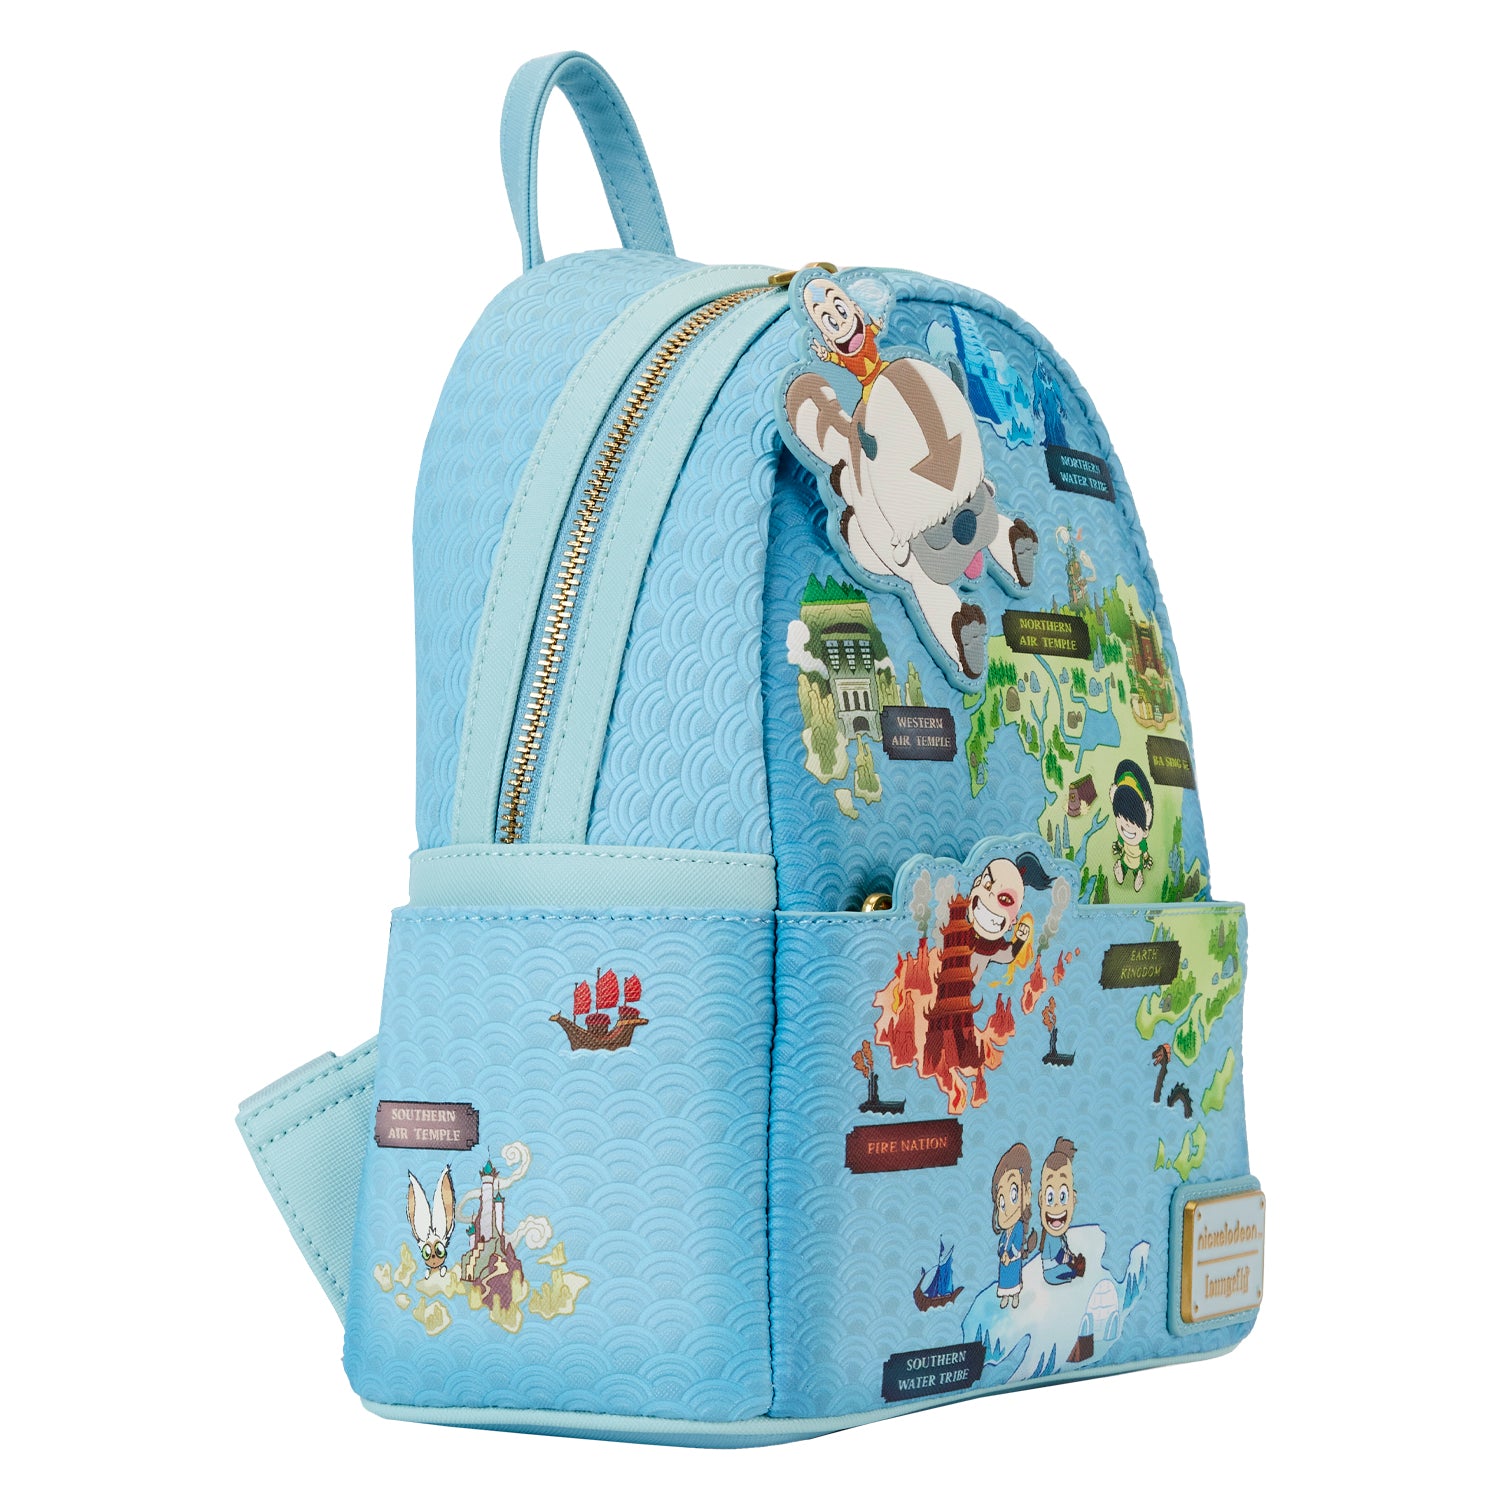 Loungefly x Nickelodeon Avatar: The Last Airbender Map Mini Backpack